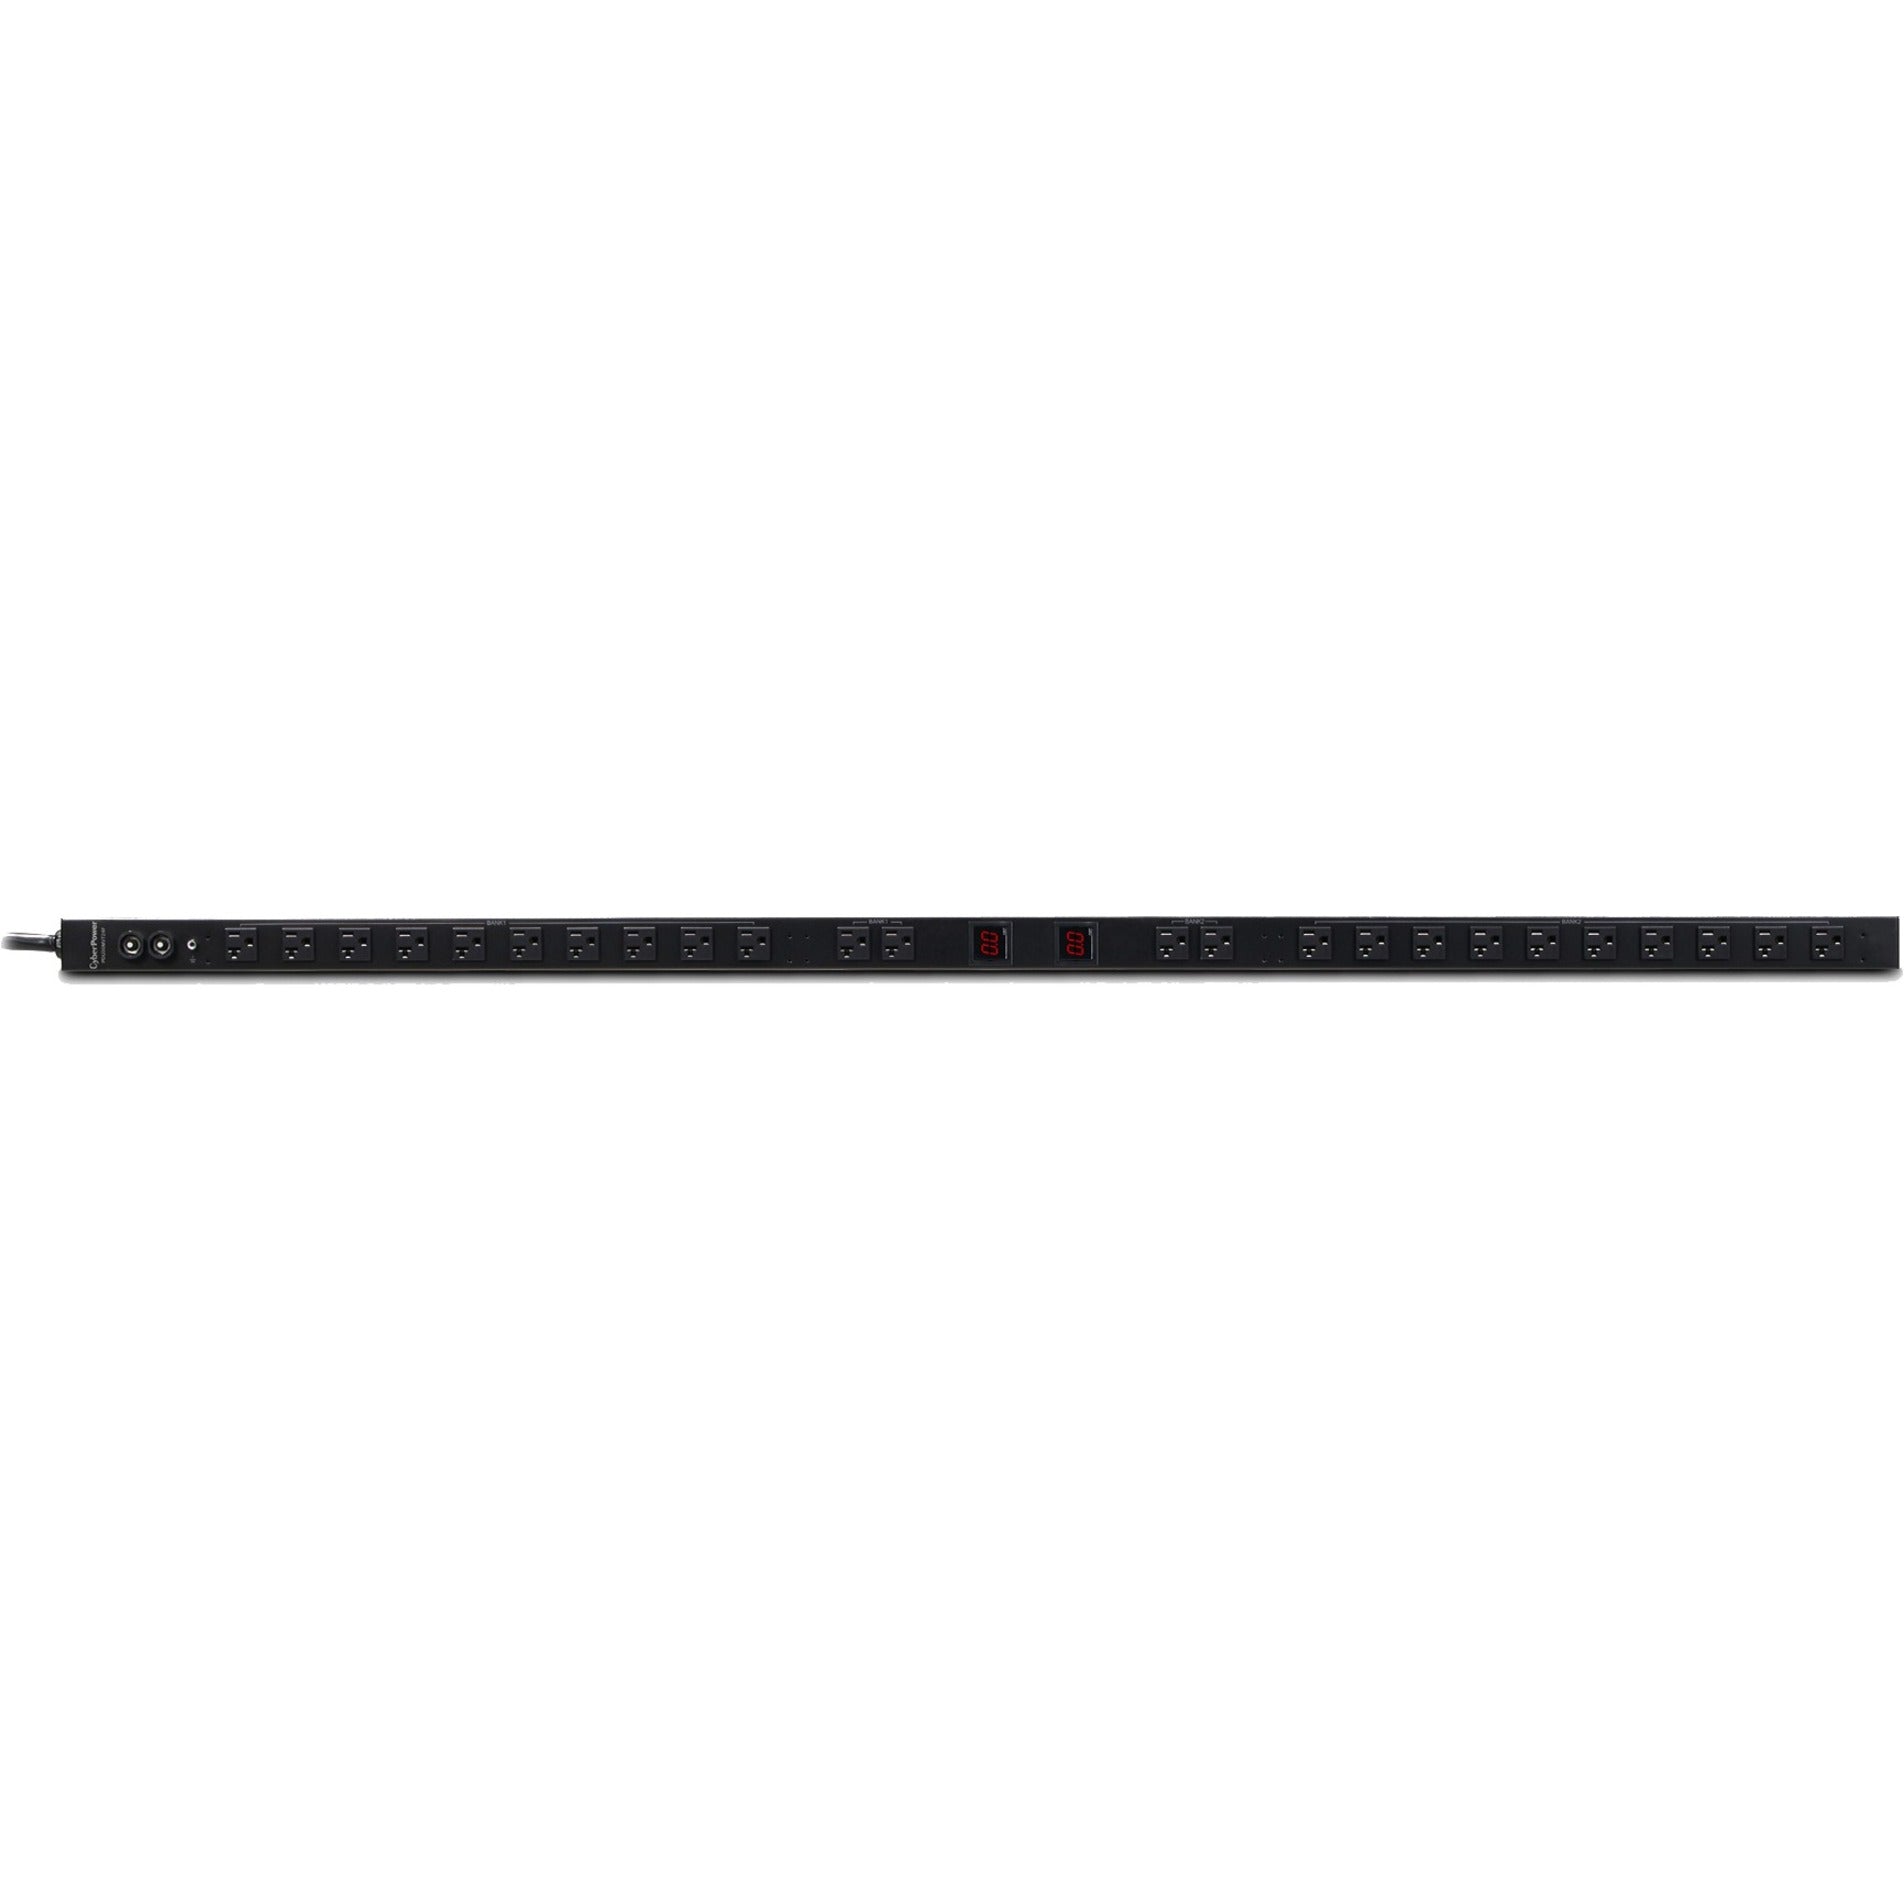 CyberPower PDU30MVT24F Metered PDU, 24-Outlets, 30A, 120V AC, Wall/Rack-Mountable